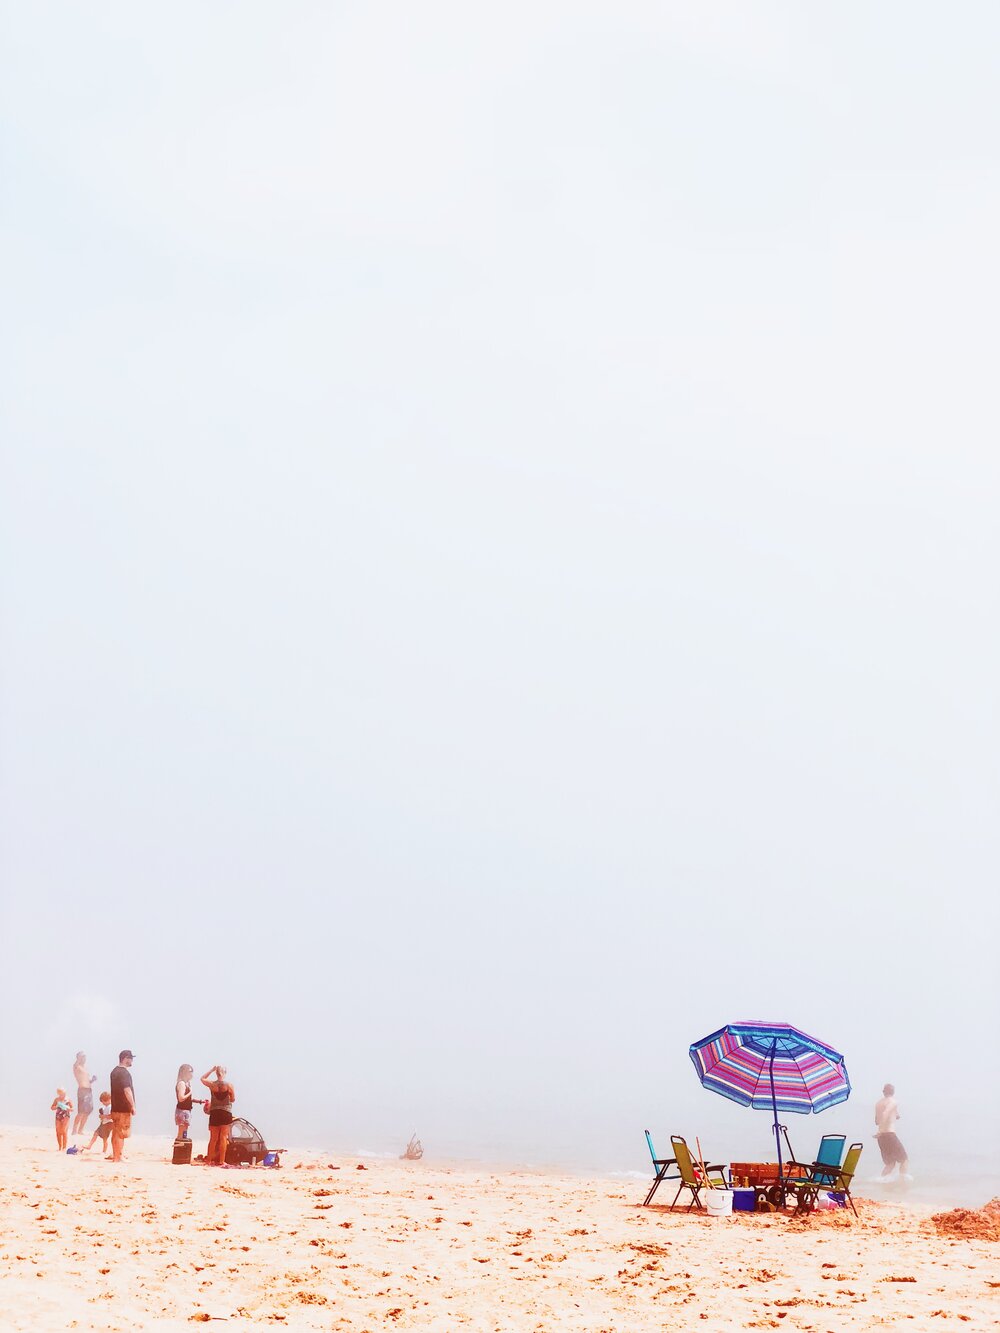 When the cold water of Lake Michigan meets a hot, humid day, the beach become foggy